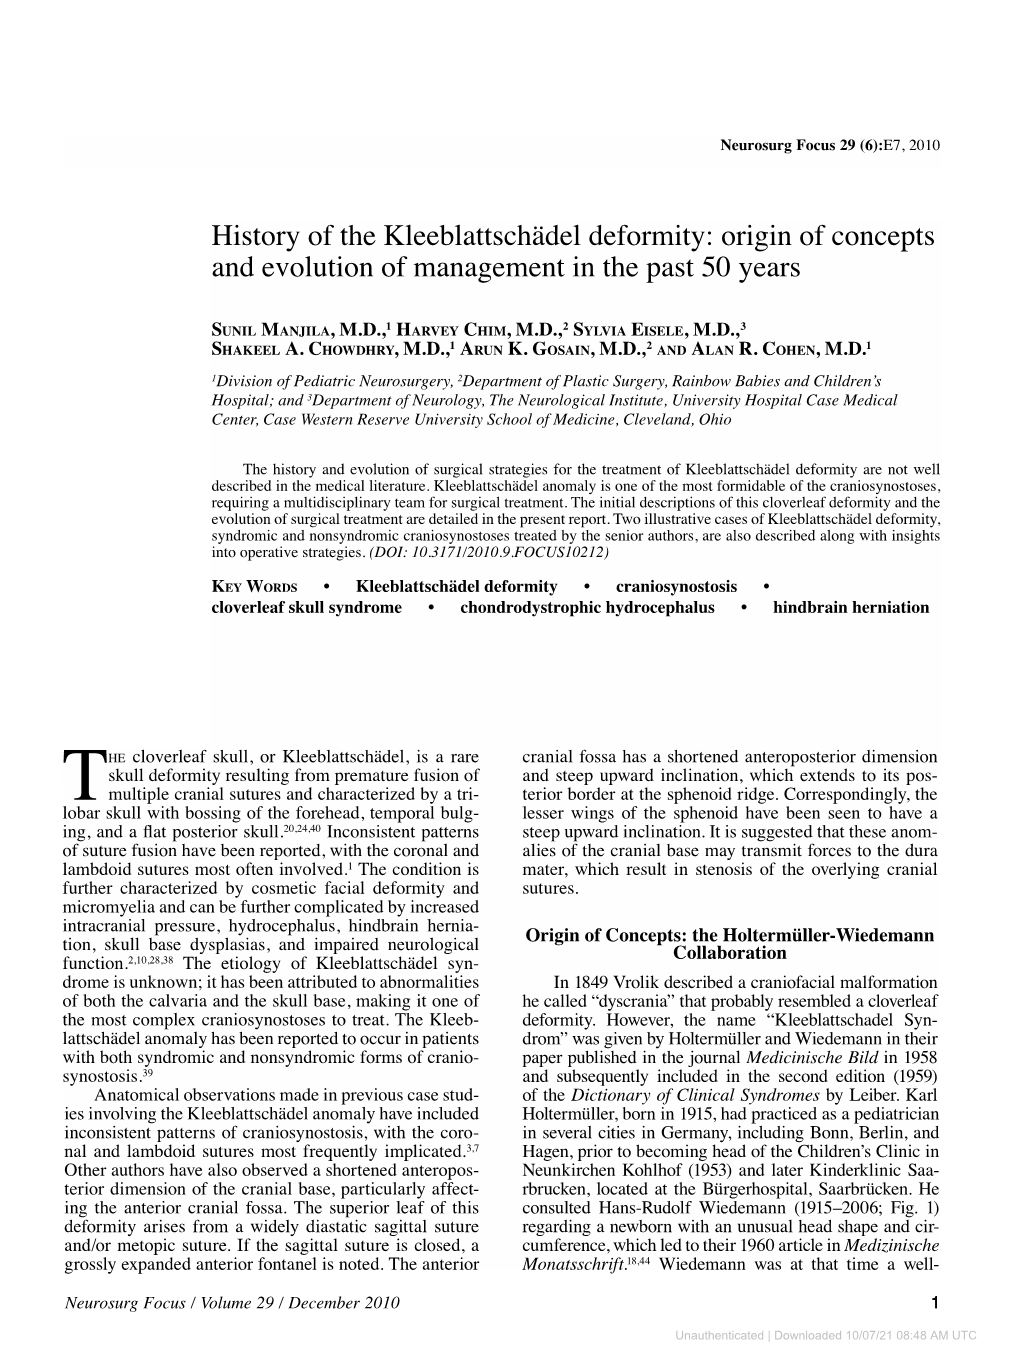 History of the Kleeblattschädel Deformity: Origin of Concepts and Evolution of Management in the Past 50 Years